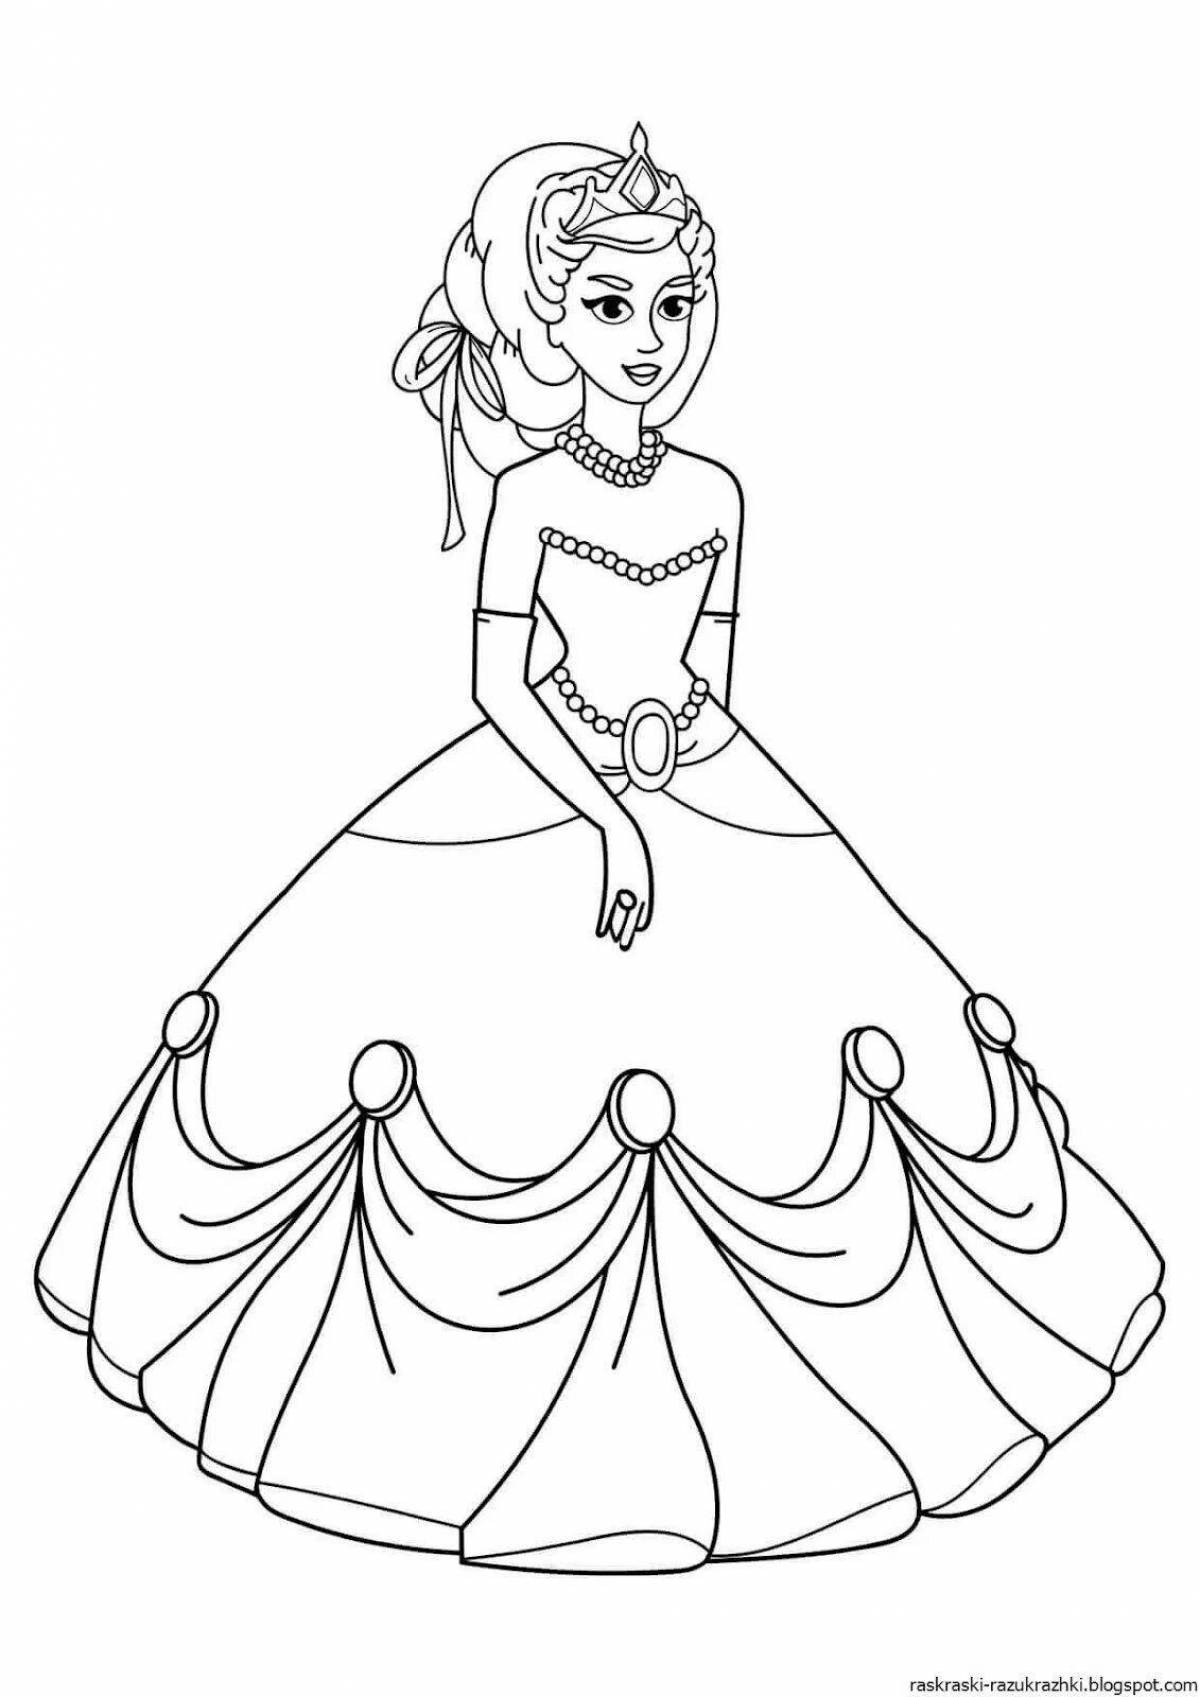 Amazing coloring pages for girls beautiful princesses